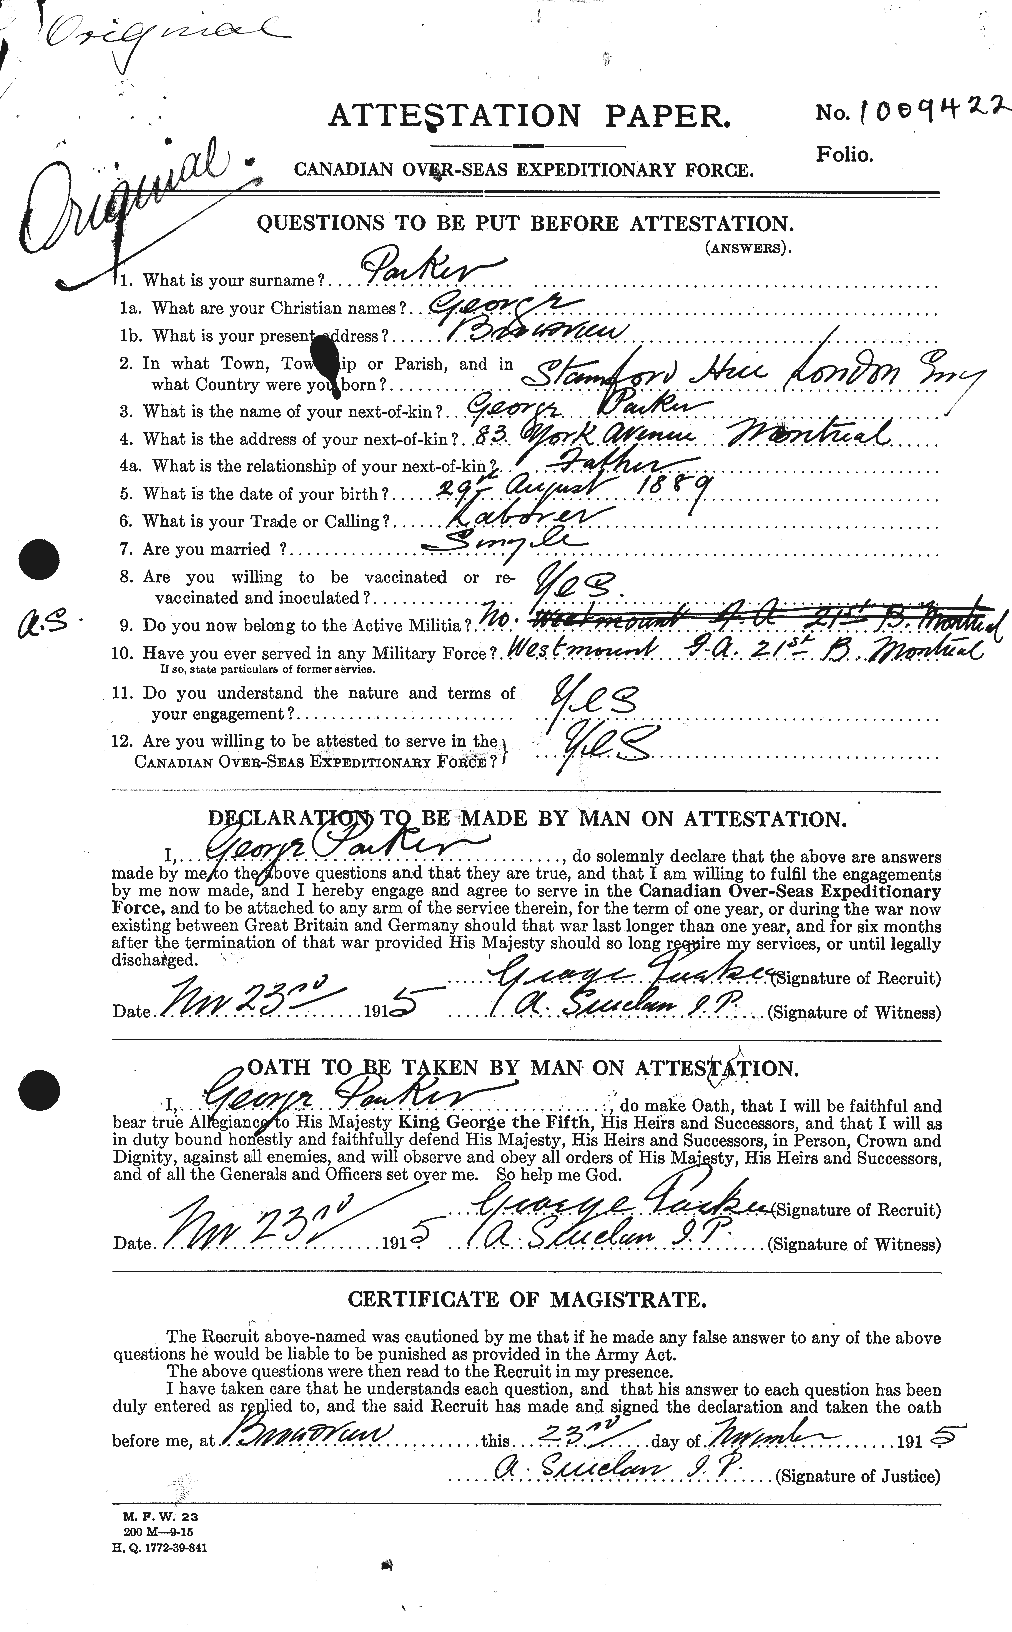 Personnel Records of the First World War - CEF 565232a